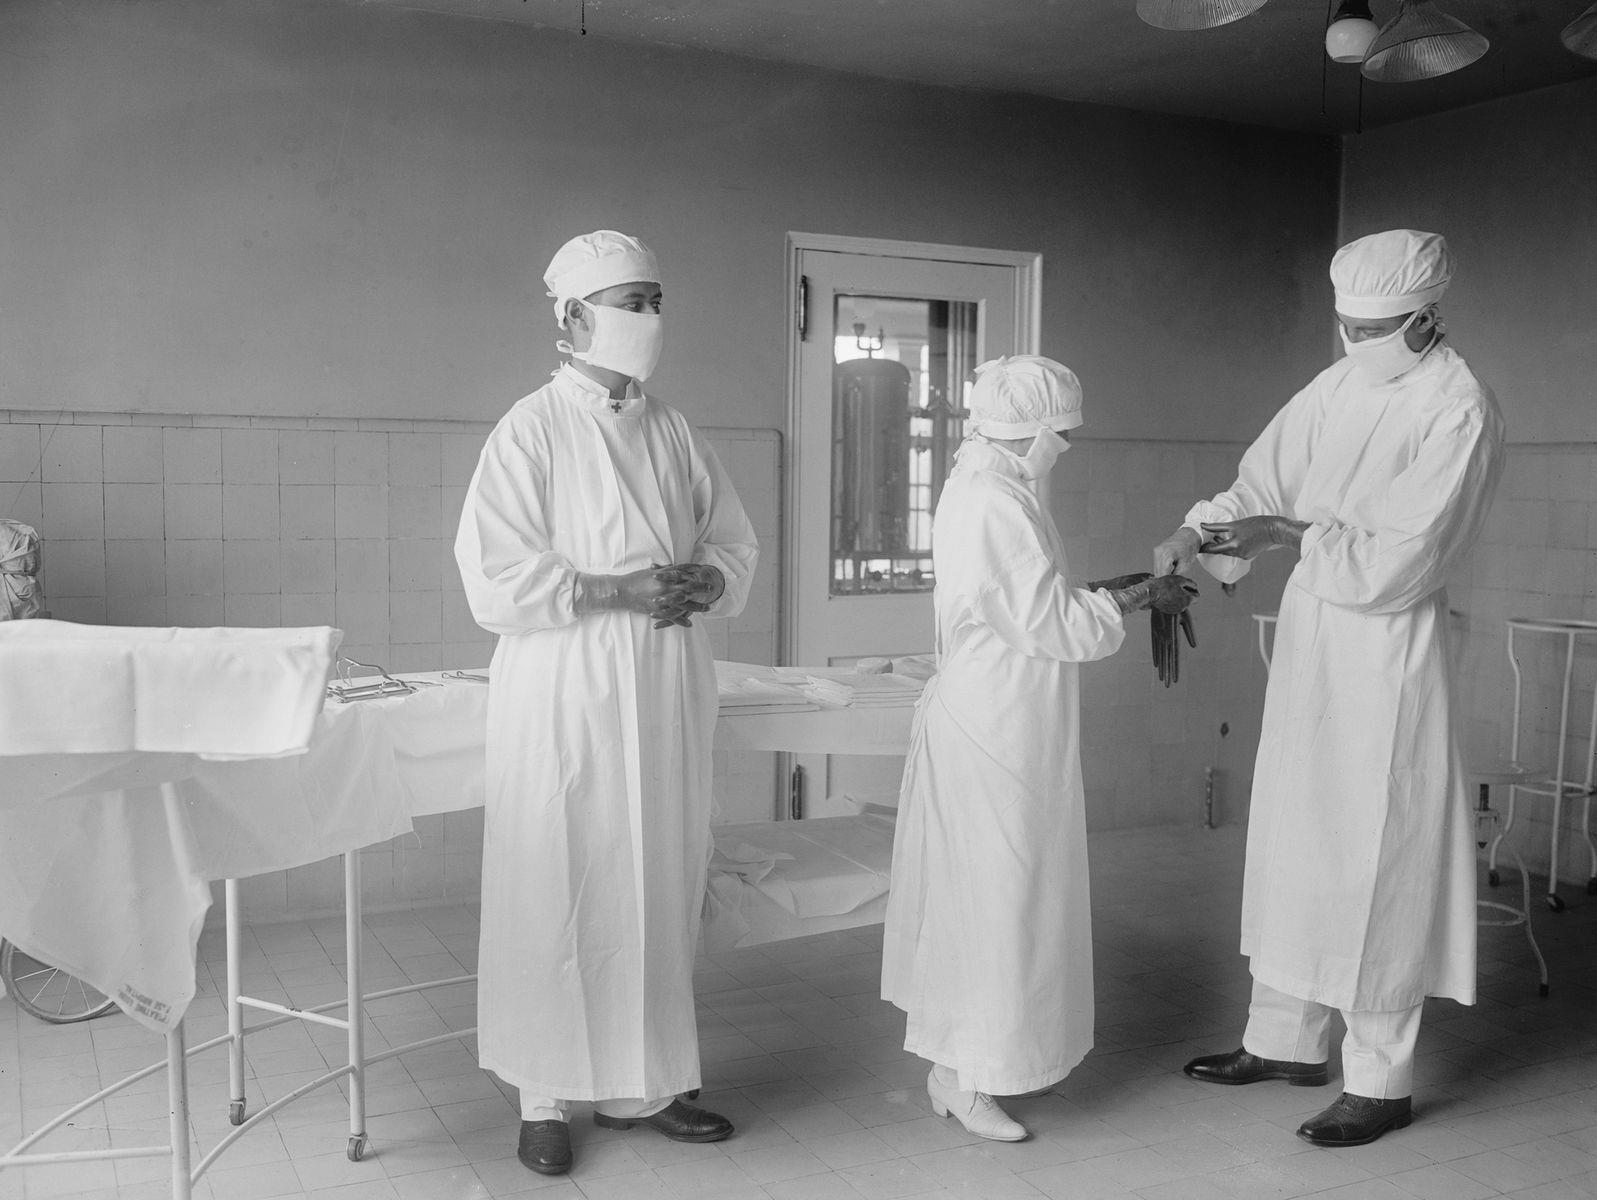 <p>Surgery in the 20th century was much more advanced than in previous eras. It was safer and more successful, and could tackle a wider range of conditions, including certain <a href="https://www.verywellhealth.com/the-history-of-surgery-timeline-3157332">transplants</a> and plastic surgery.</p>